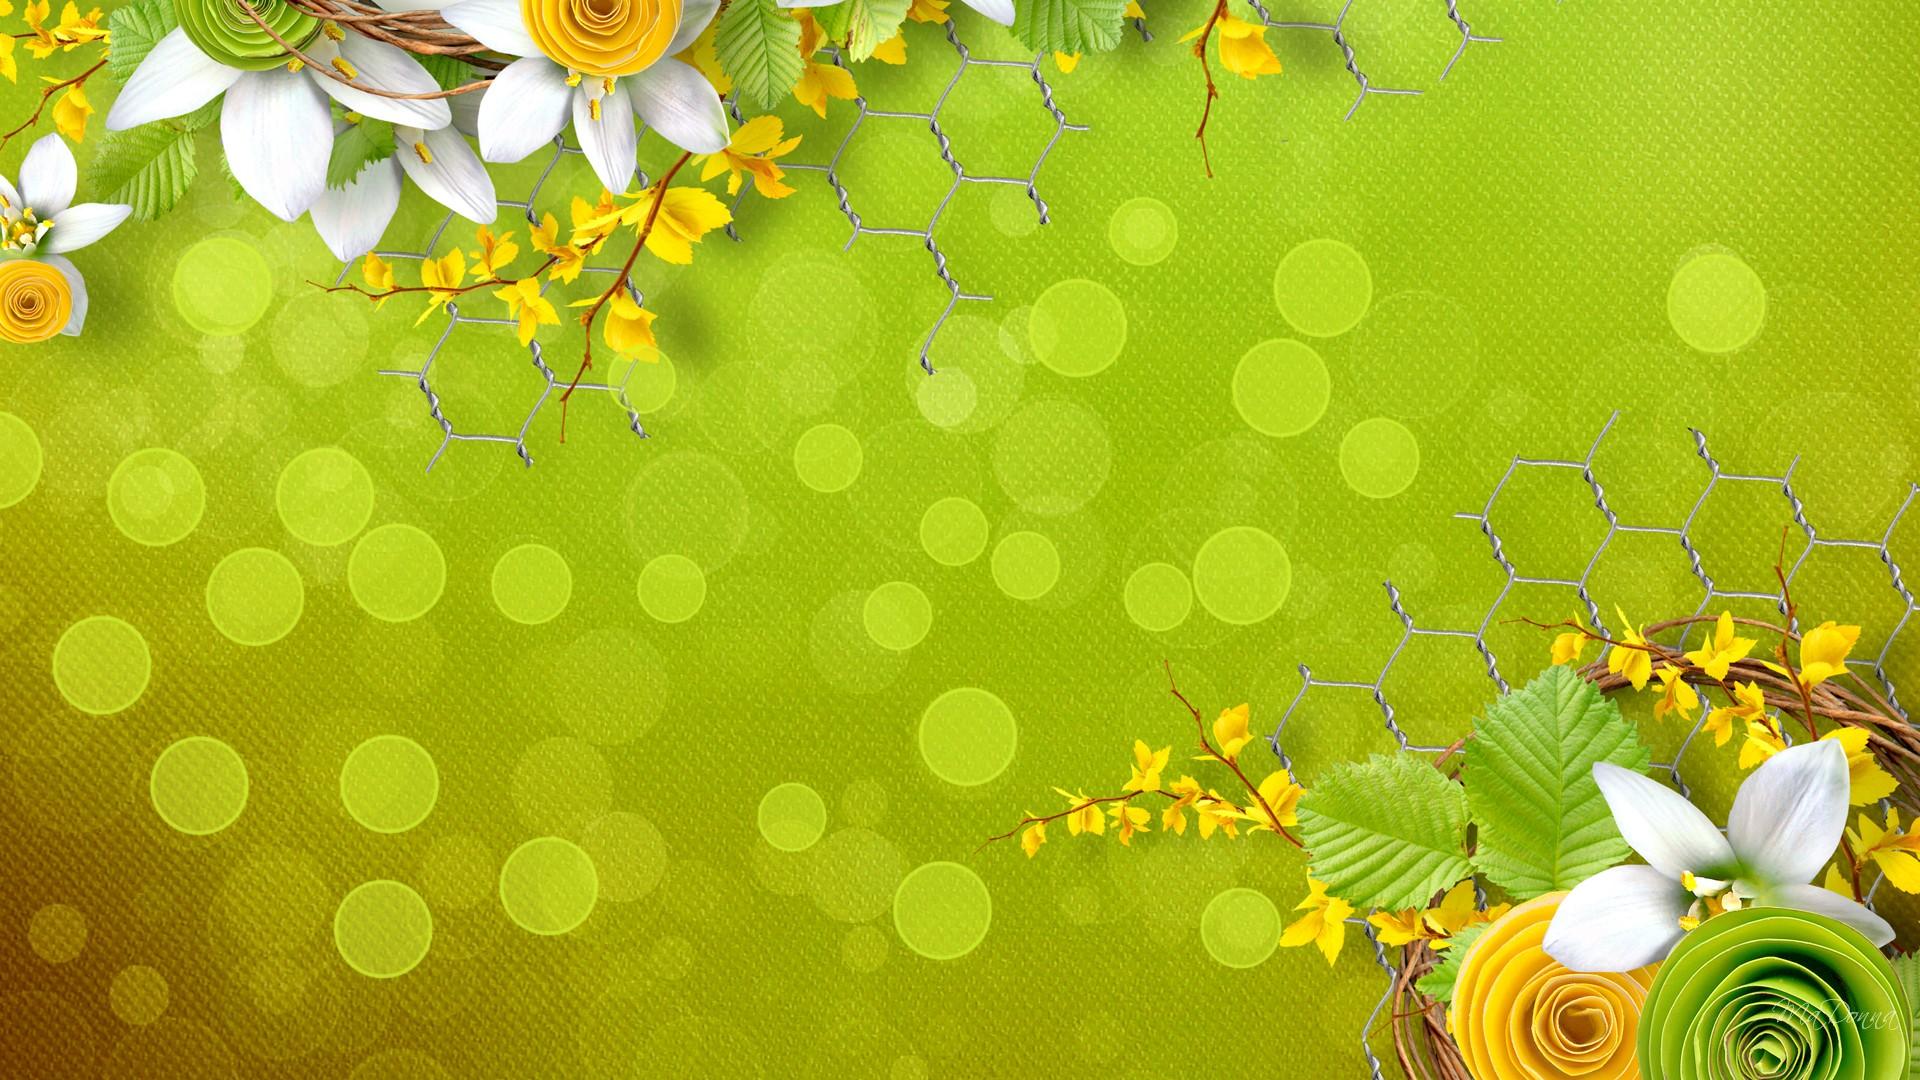 Green And Yellow Flowers Collage Hd Wallpaper Wallpaper List